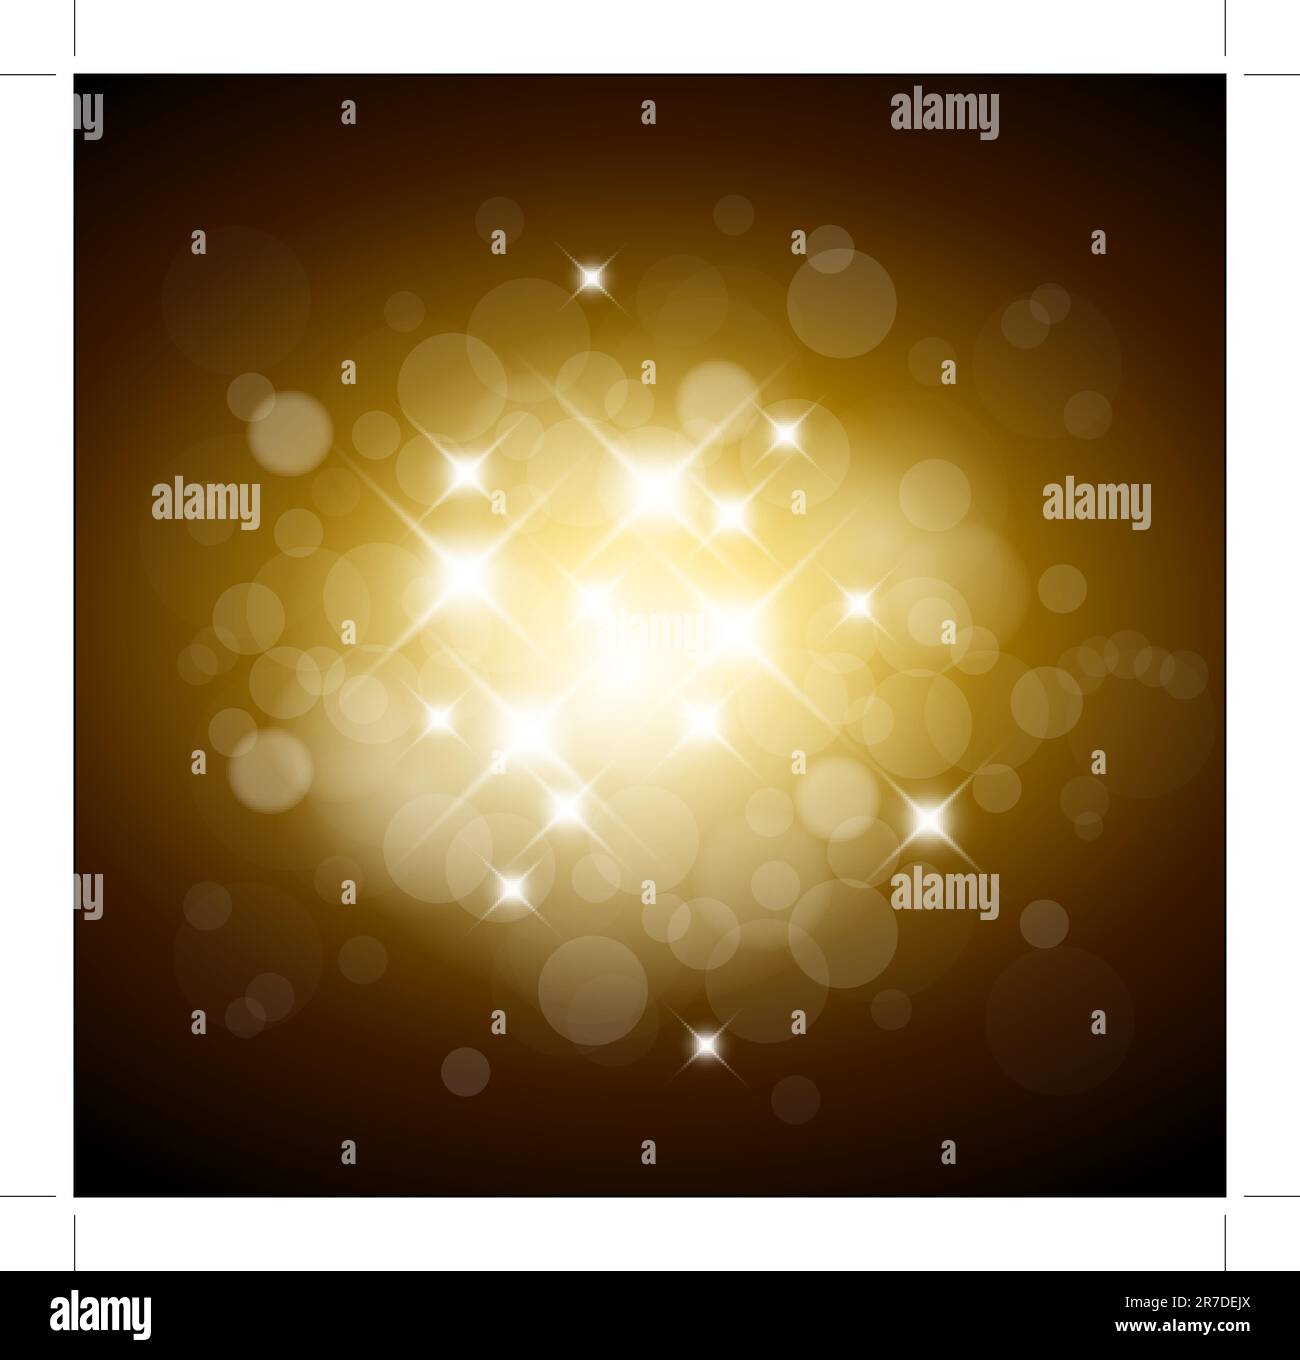 Golden  background with white lights and place for your text Stock Vector